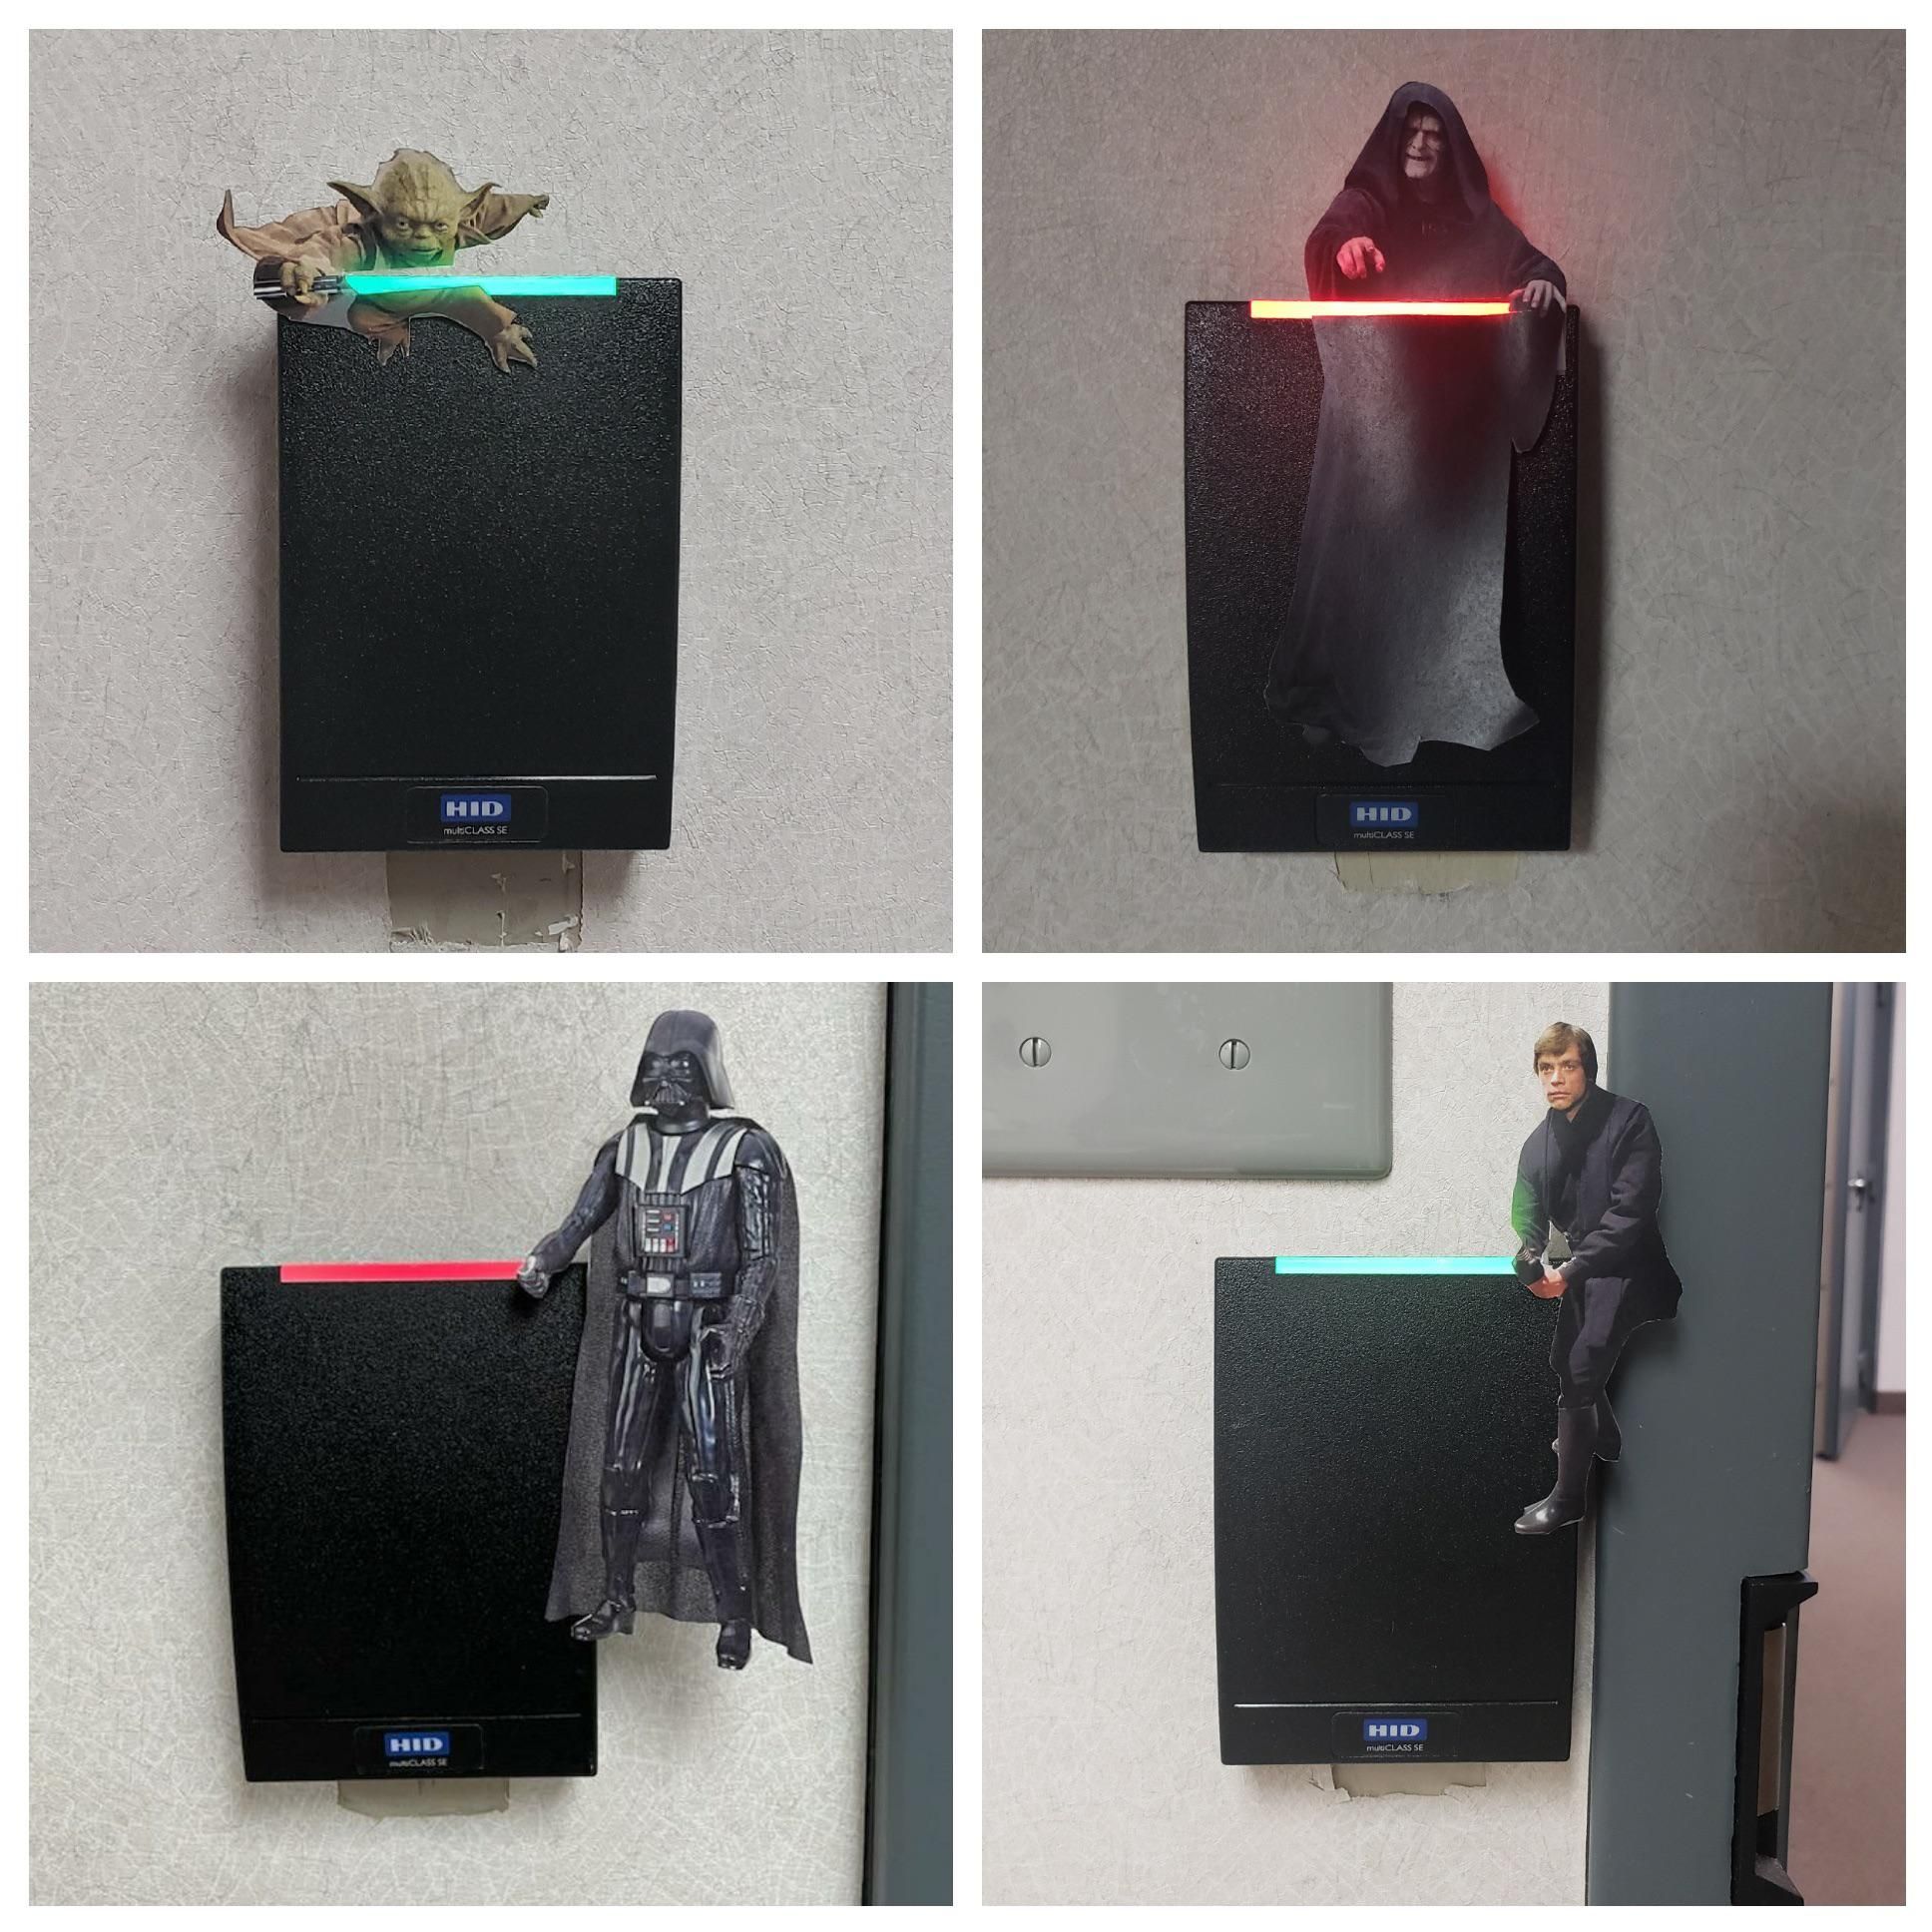 UPDATED: Got new swipe access readers at work. New additions with the proper lightsaber colors.